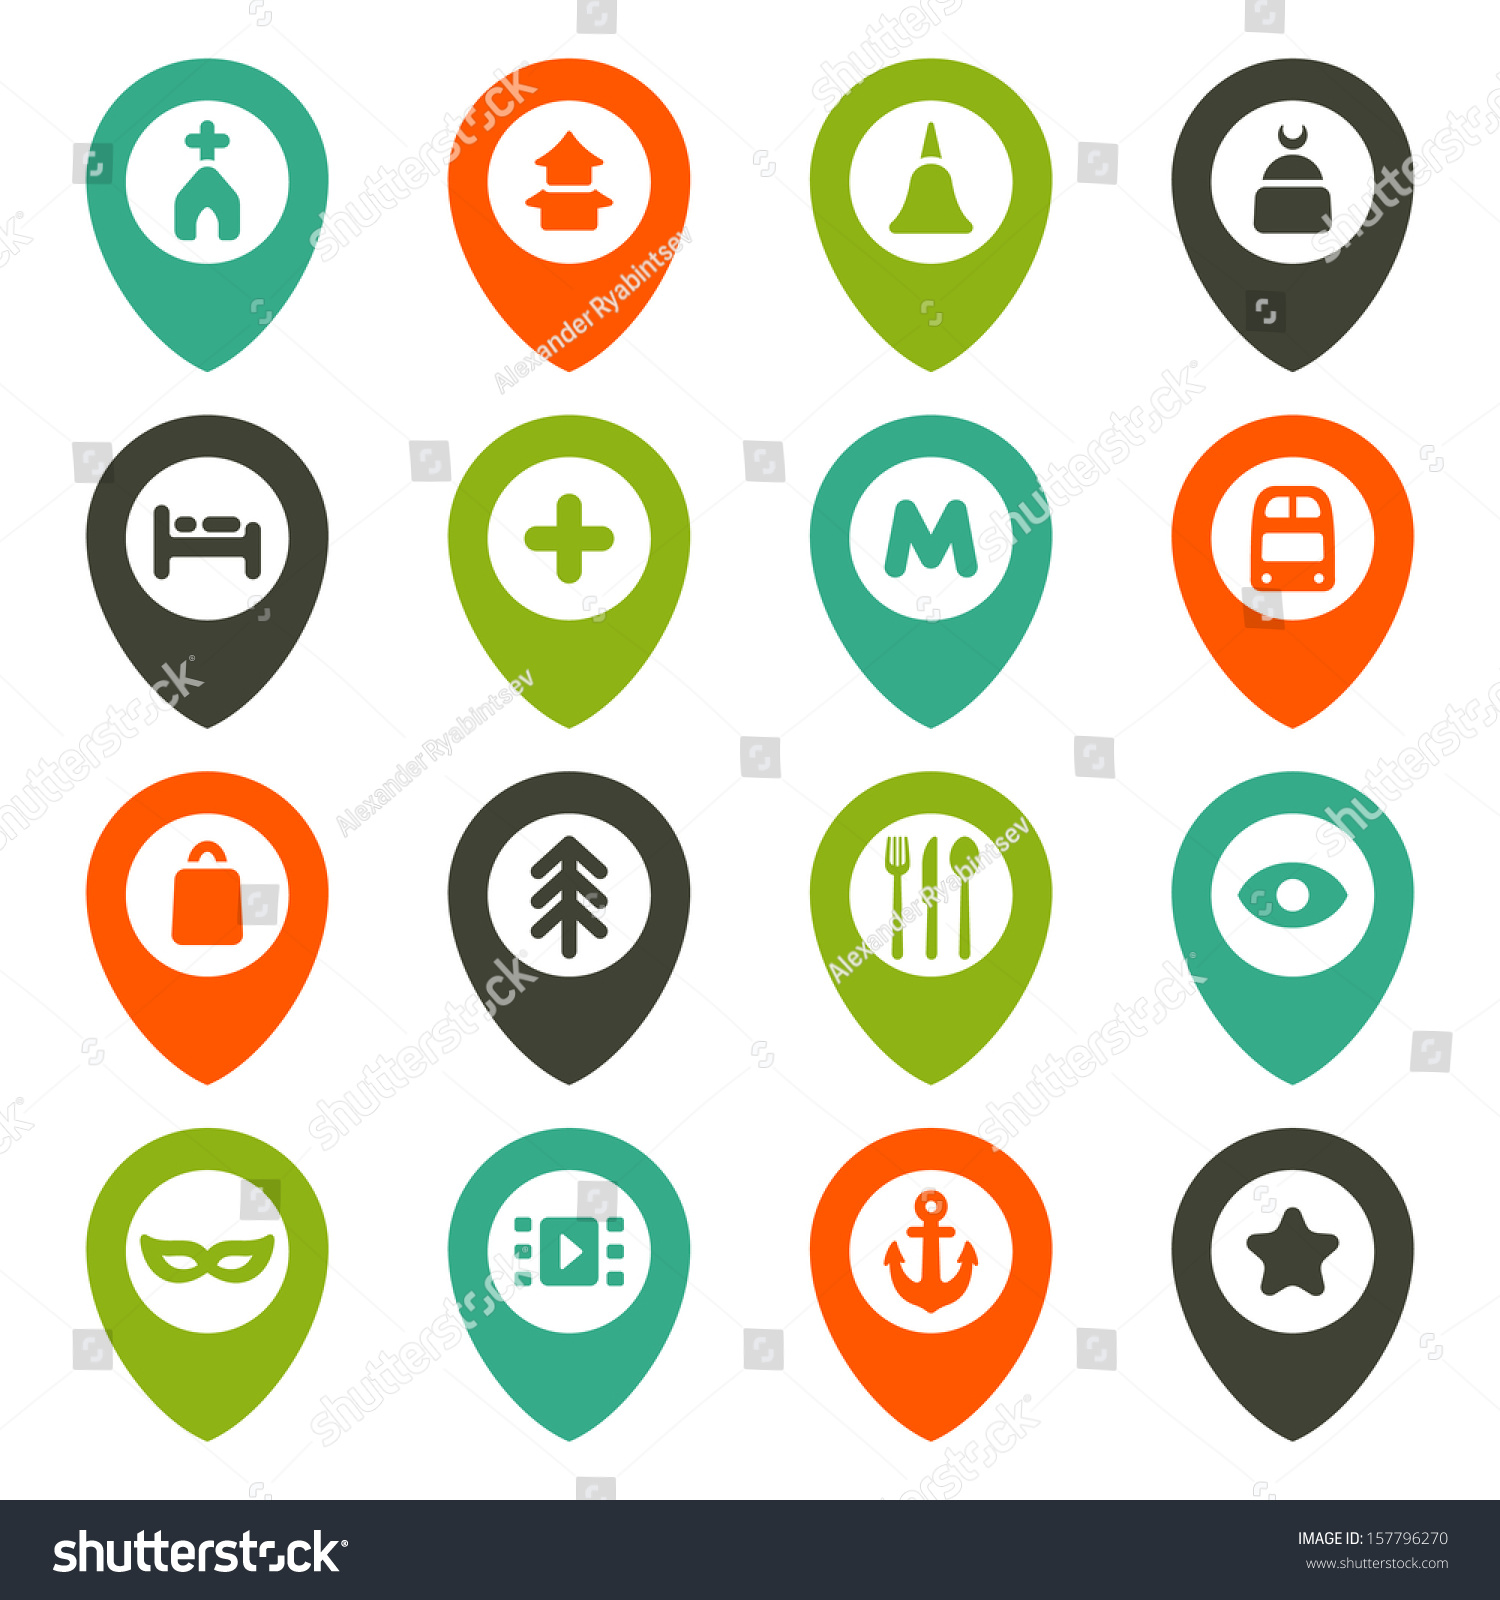 Map Icons Set Stock Vector 157796270 - Shutterstock